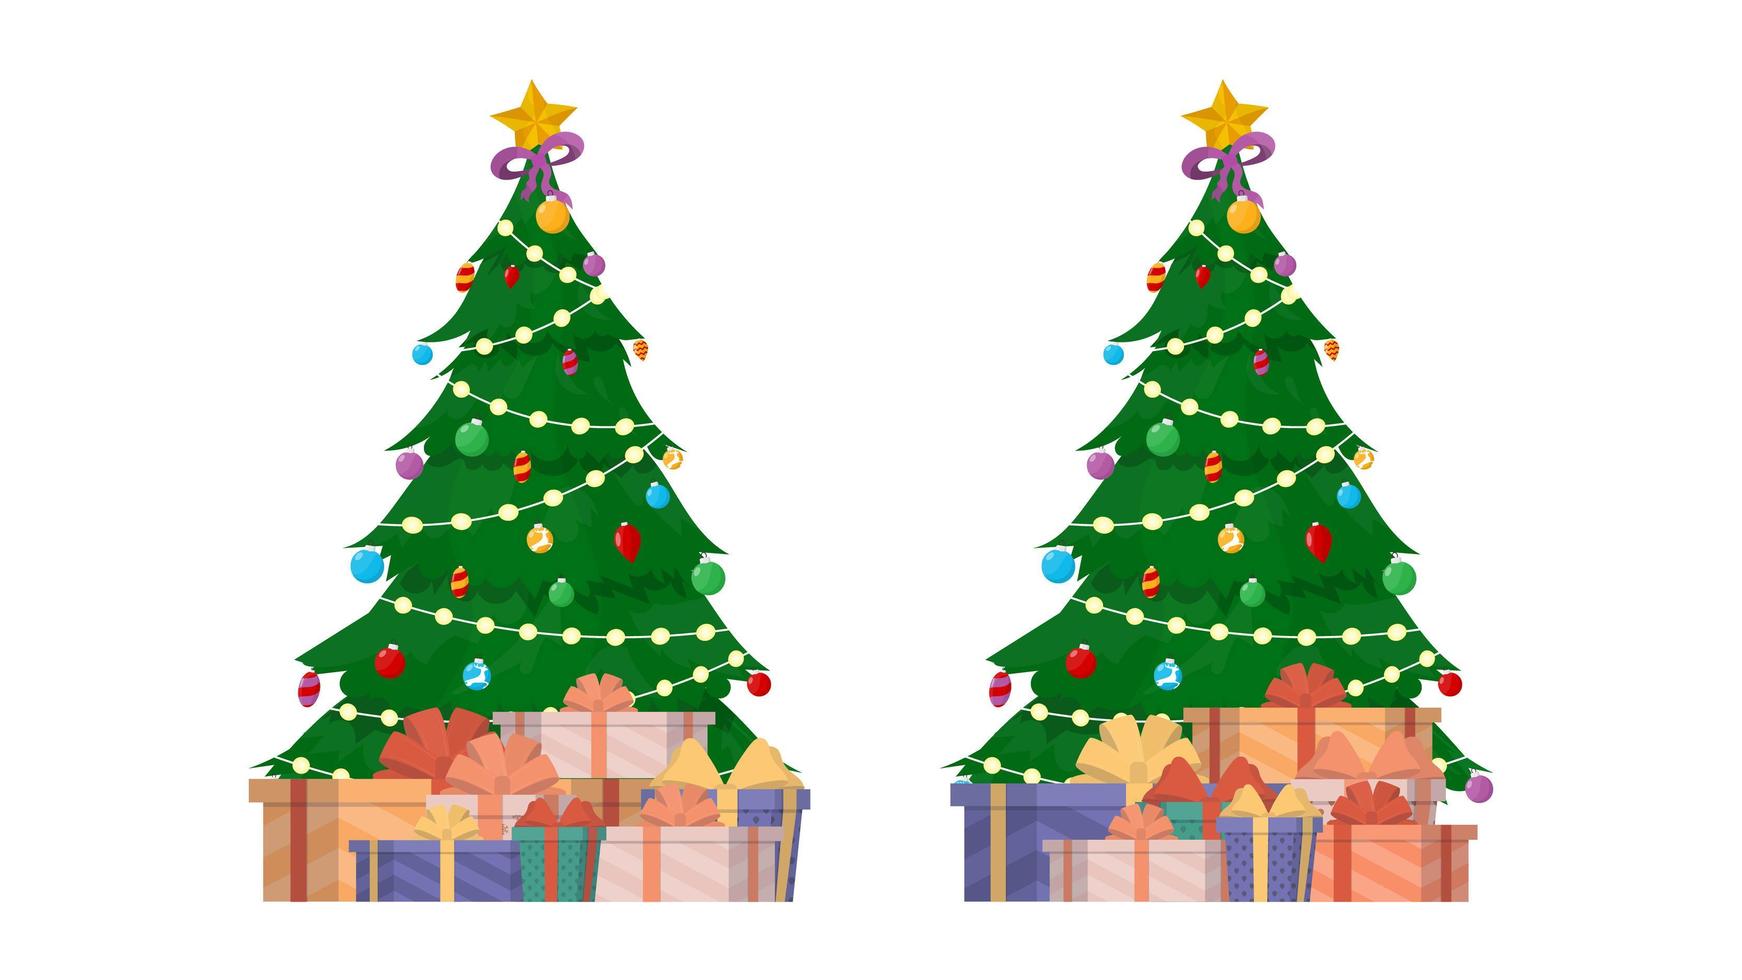 New Year banner with Christmas tree and gifts. Green coniferous tree. Gifts under the tree. Vector. vector